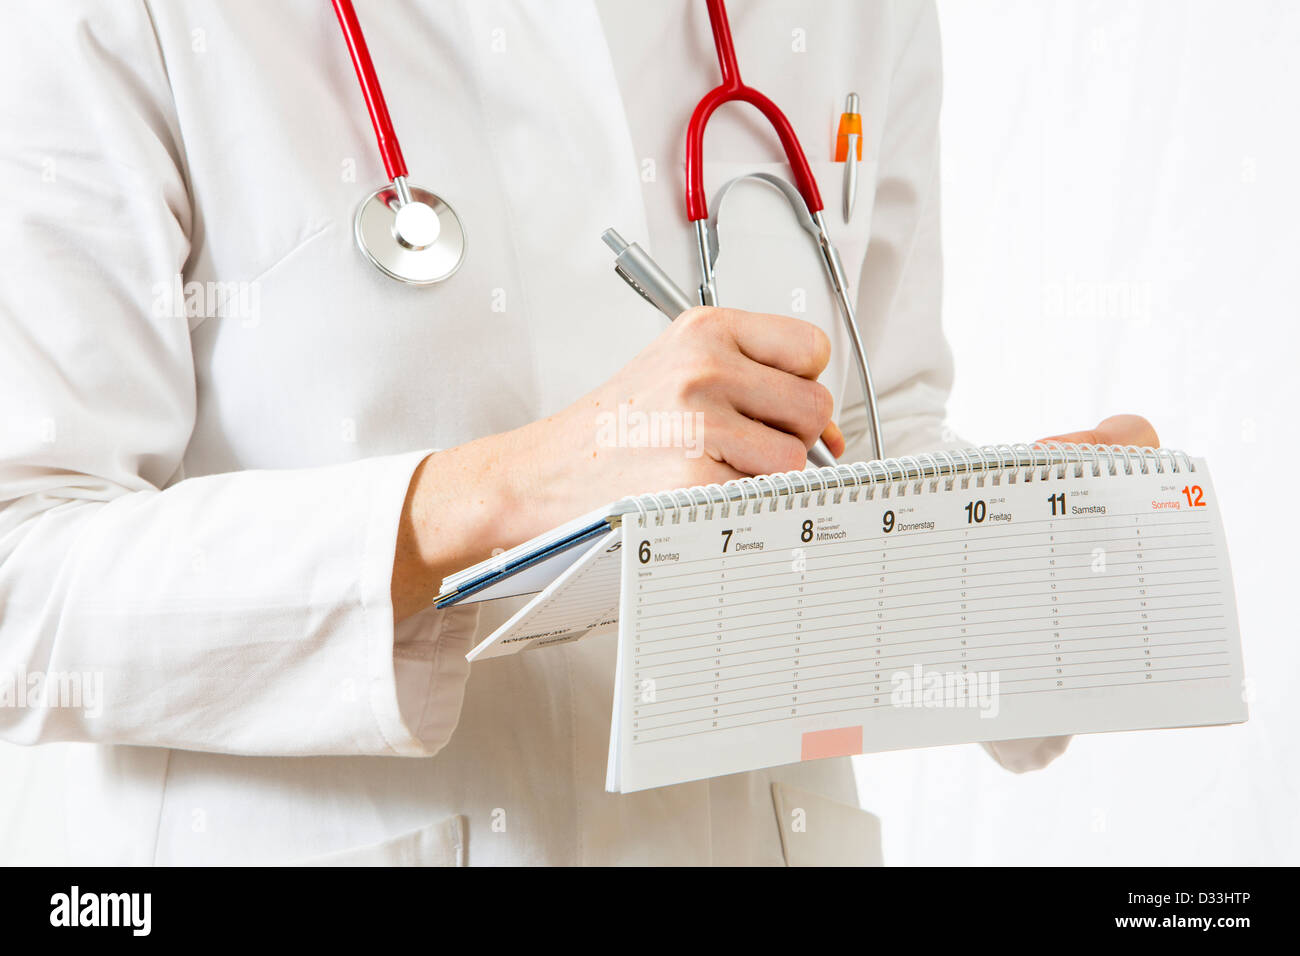 Symbolic image medicine. Doctor is writing down appointments in a calender. Stock Photo